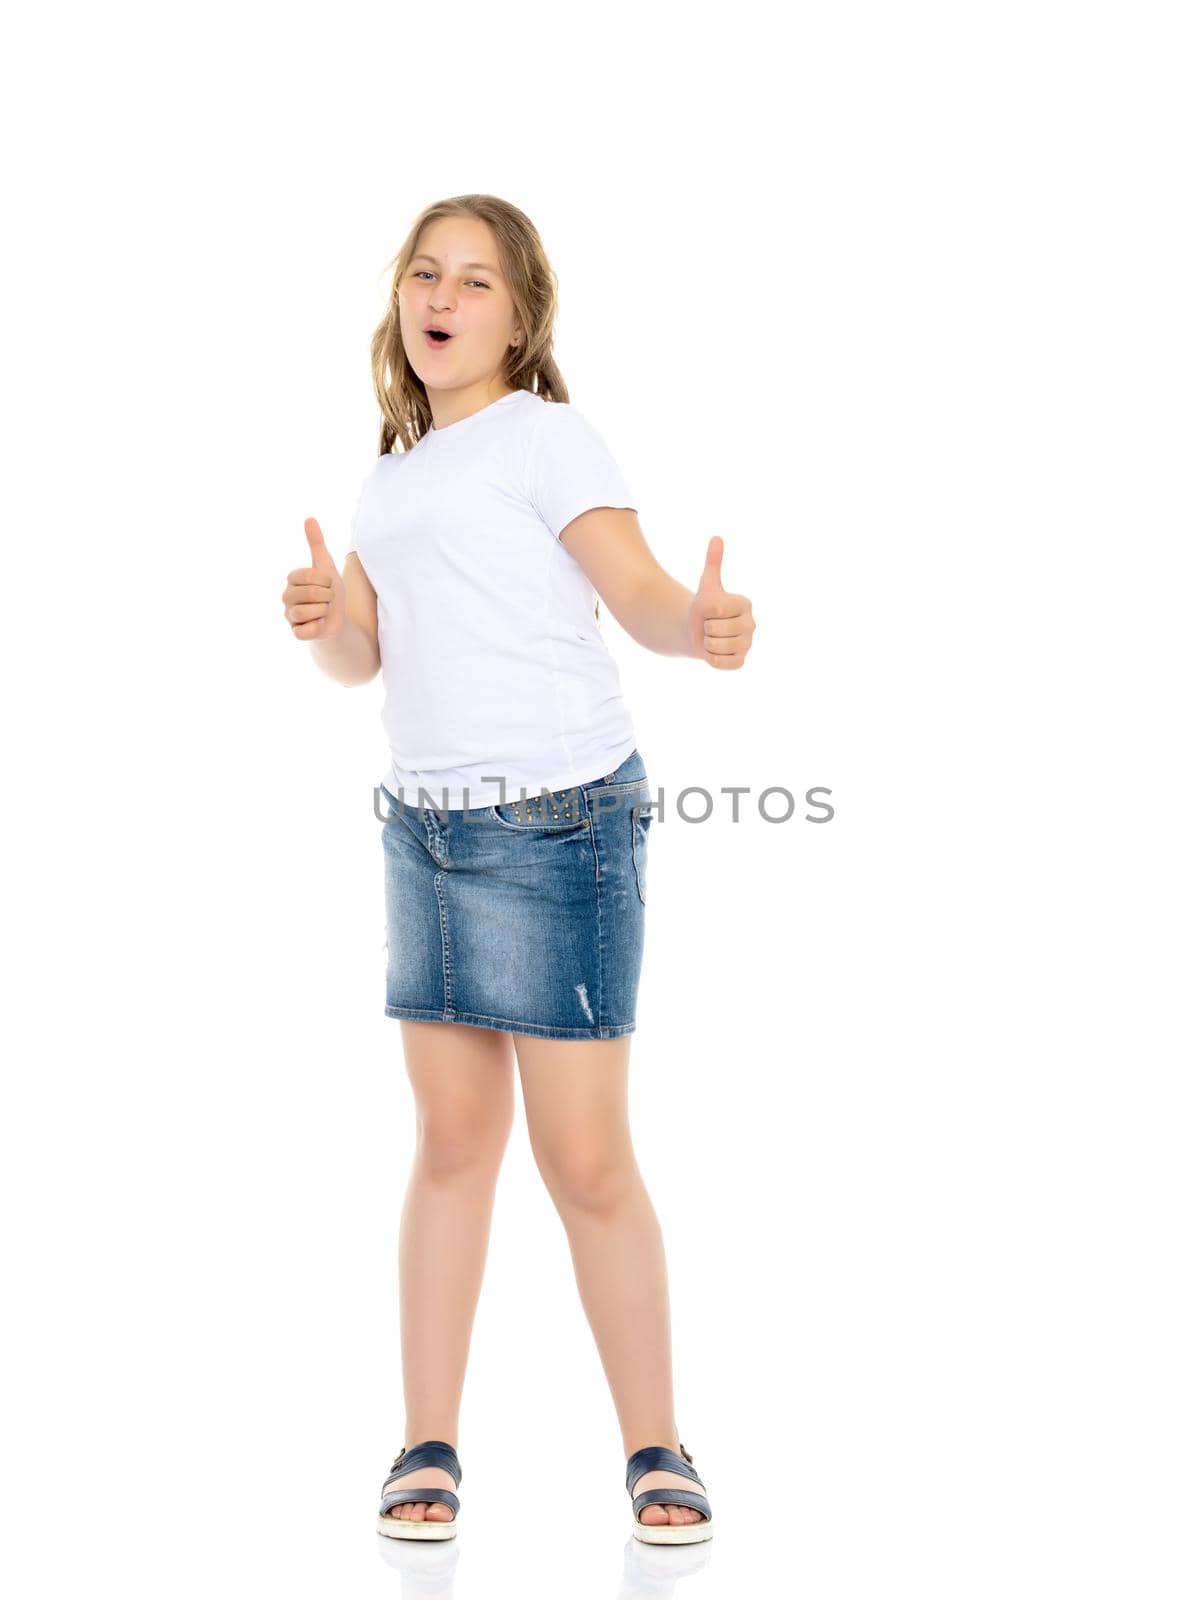 A little school girl in a white empty T-shirt. The concept of advertising and design of T-shirts. Isolated on white background.